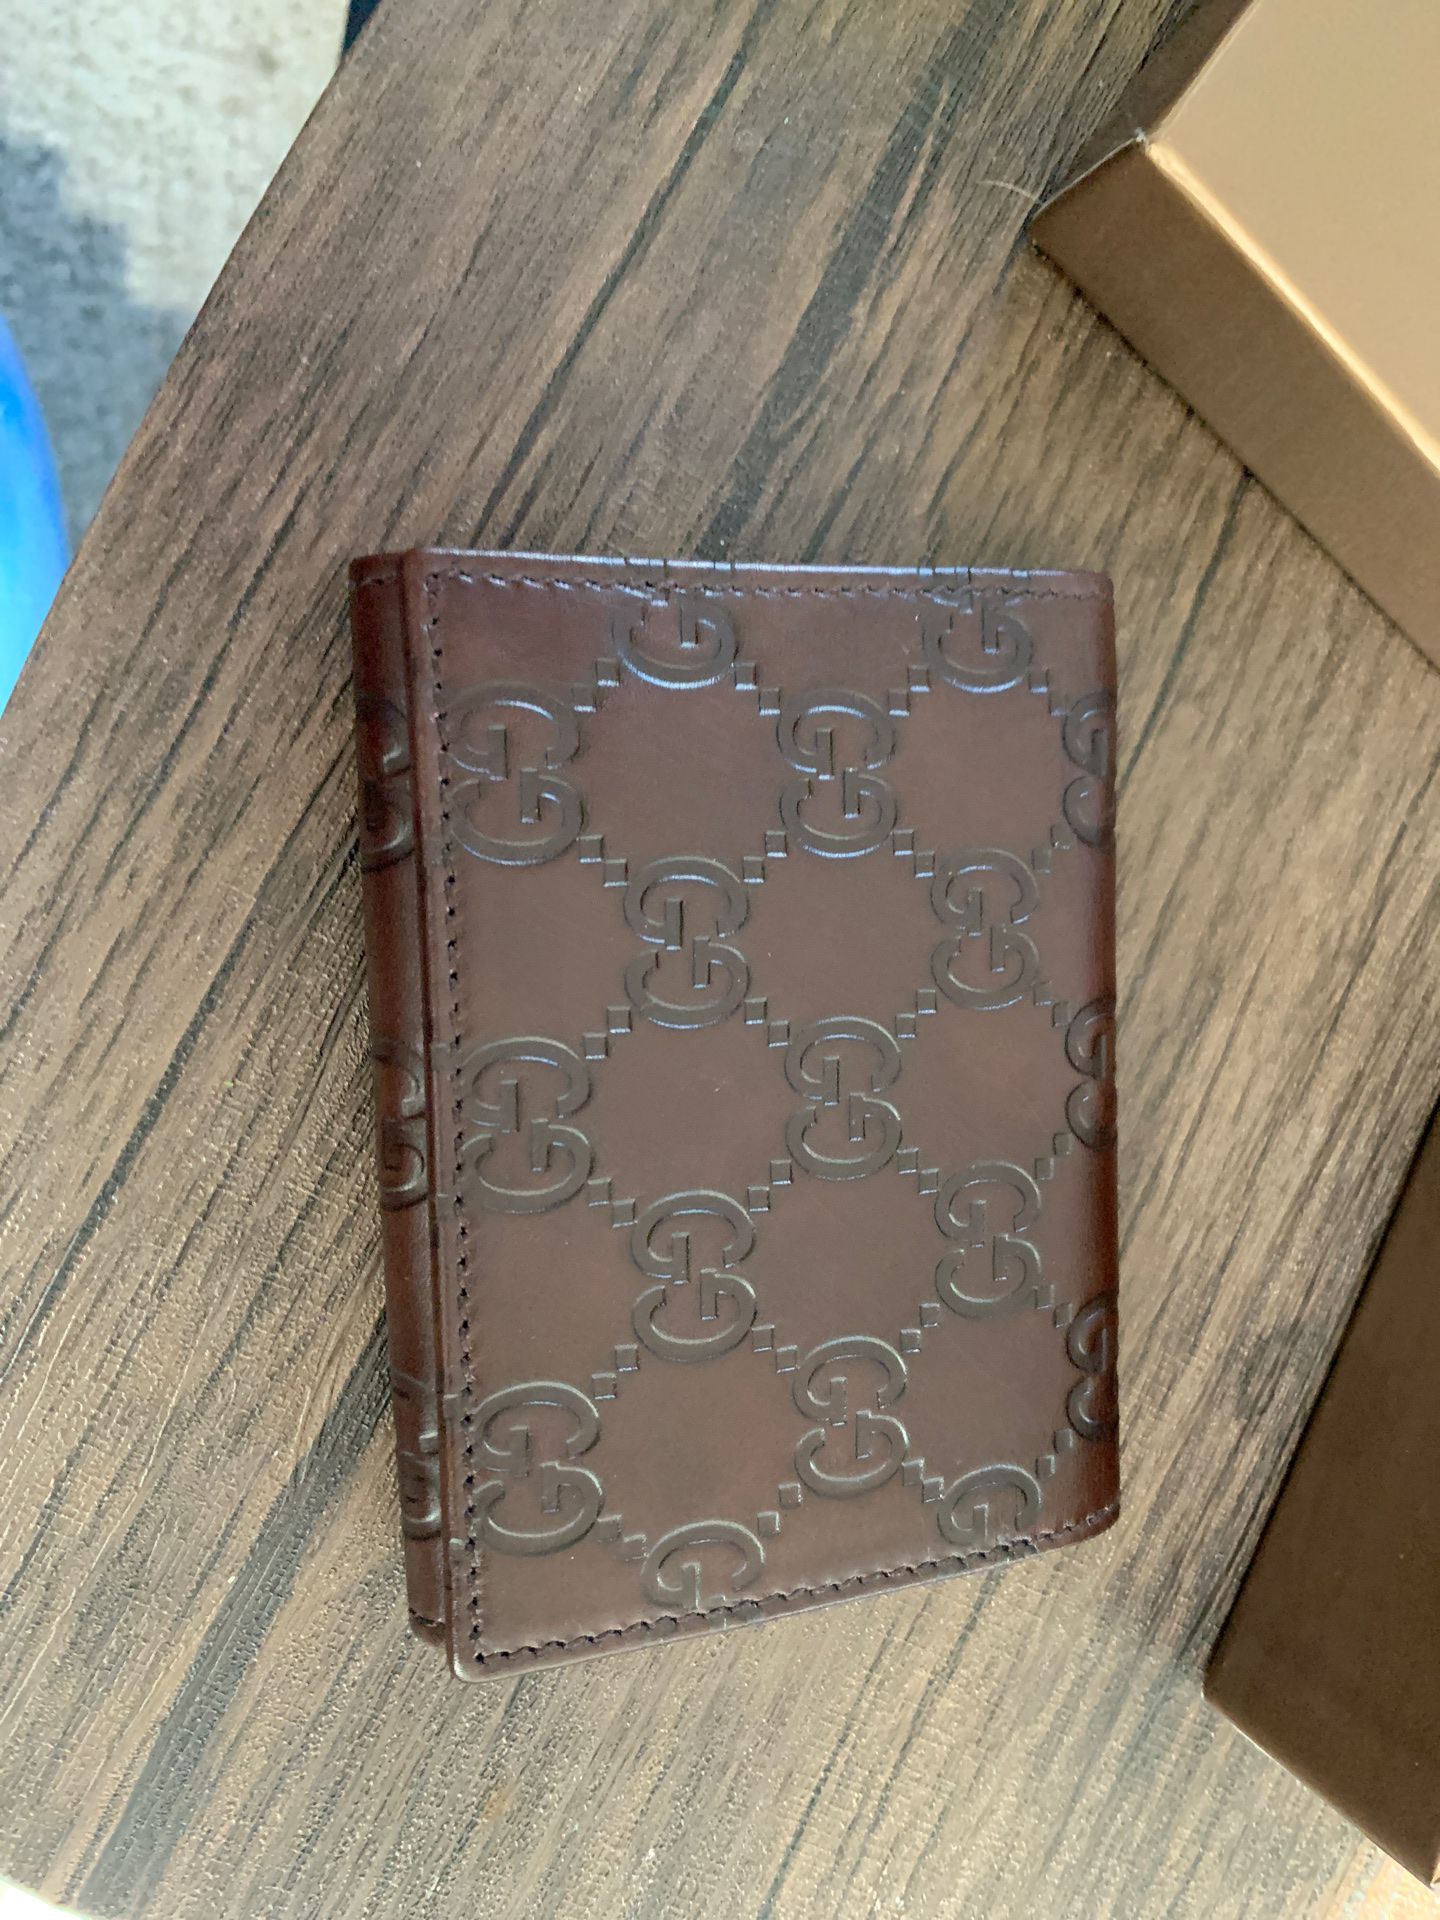 New and Never used Unisex Gucci wallet